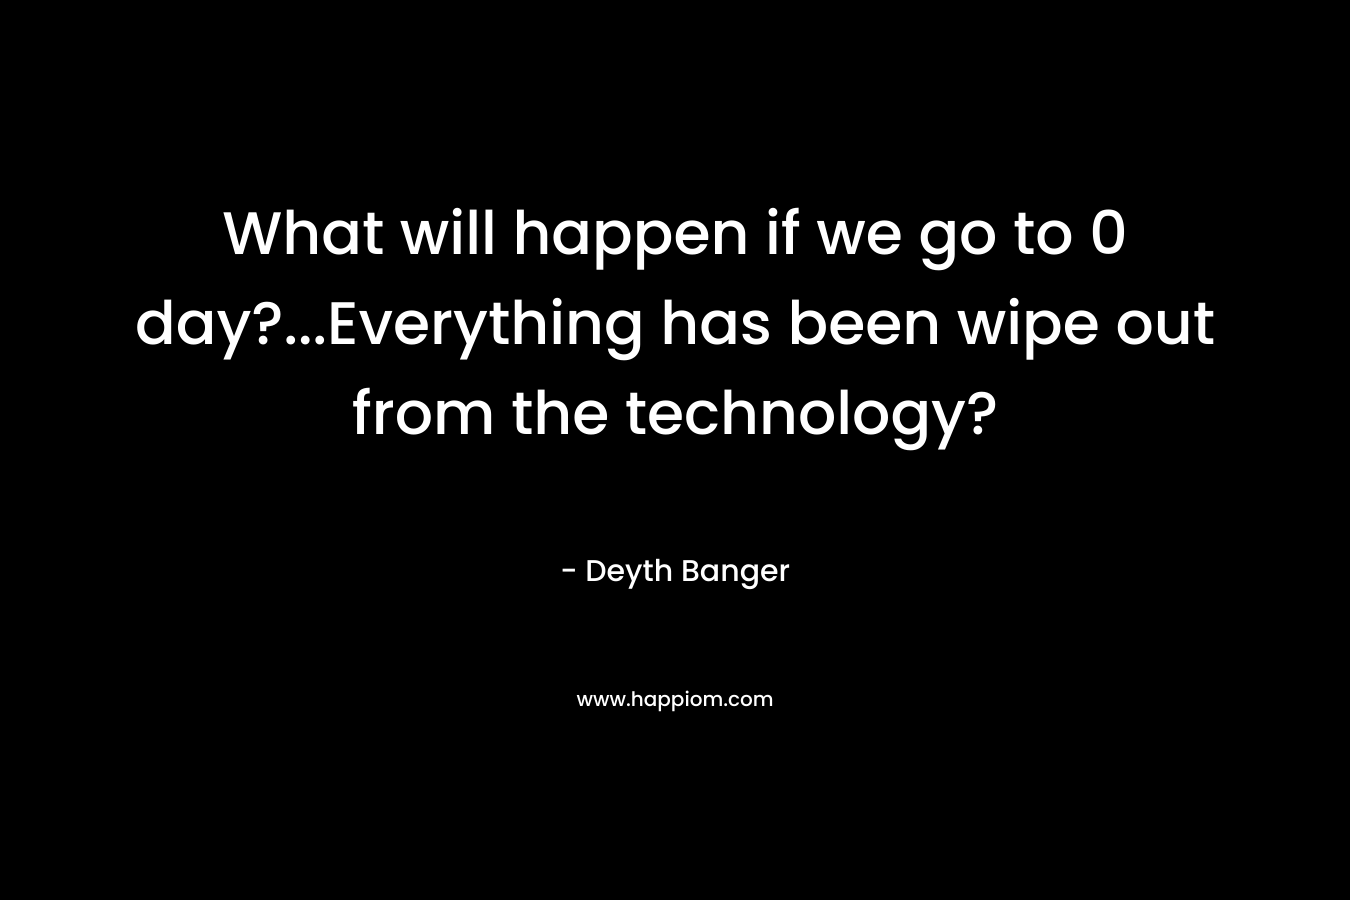 What will happen if we go to 0 day?...Everything has been wipe out from the technology?